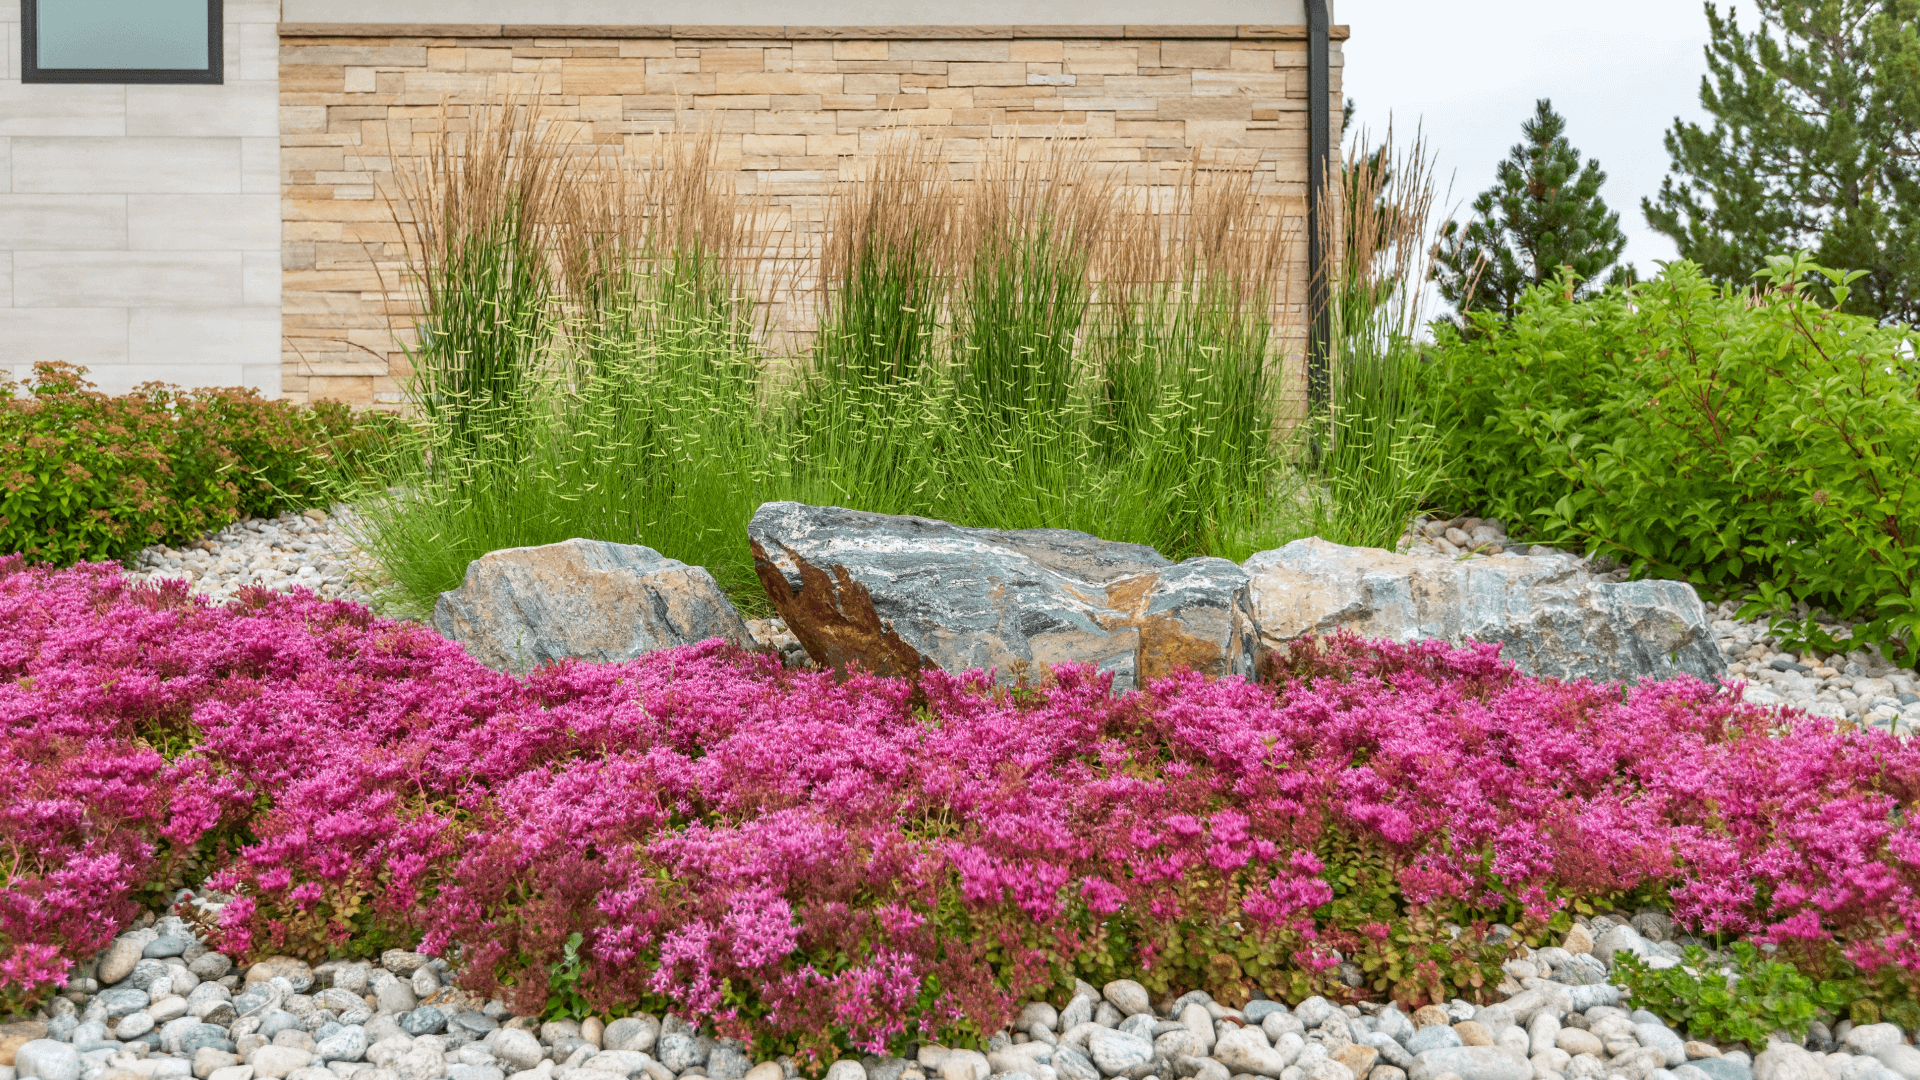 pink native flowers on a bed of smaller rocks. Boulders and large native grass in the background